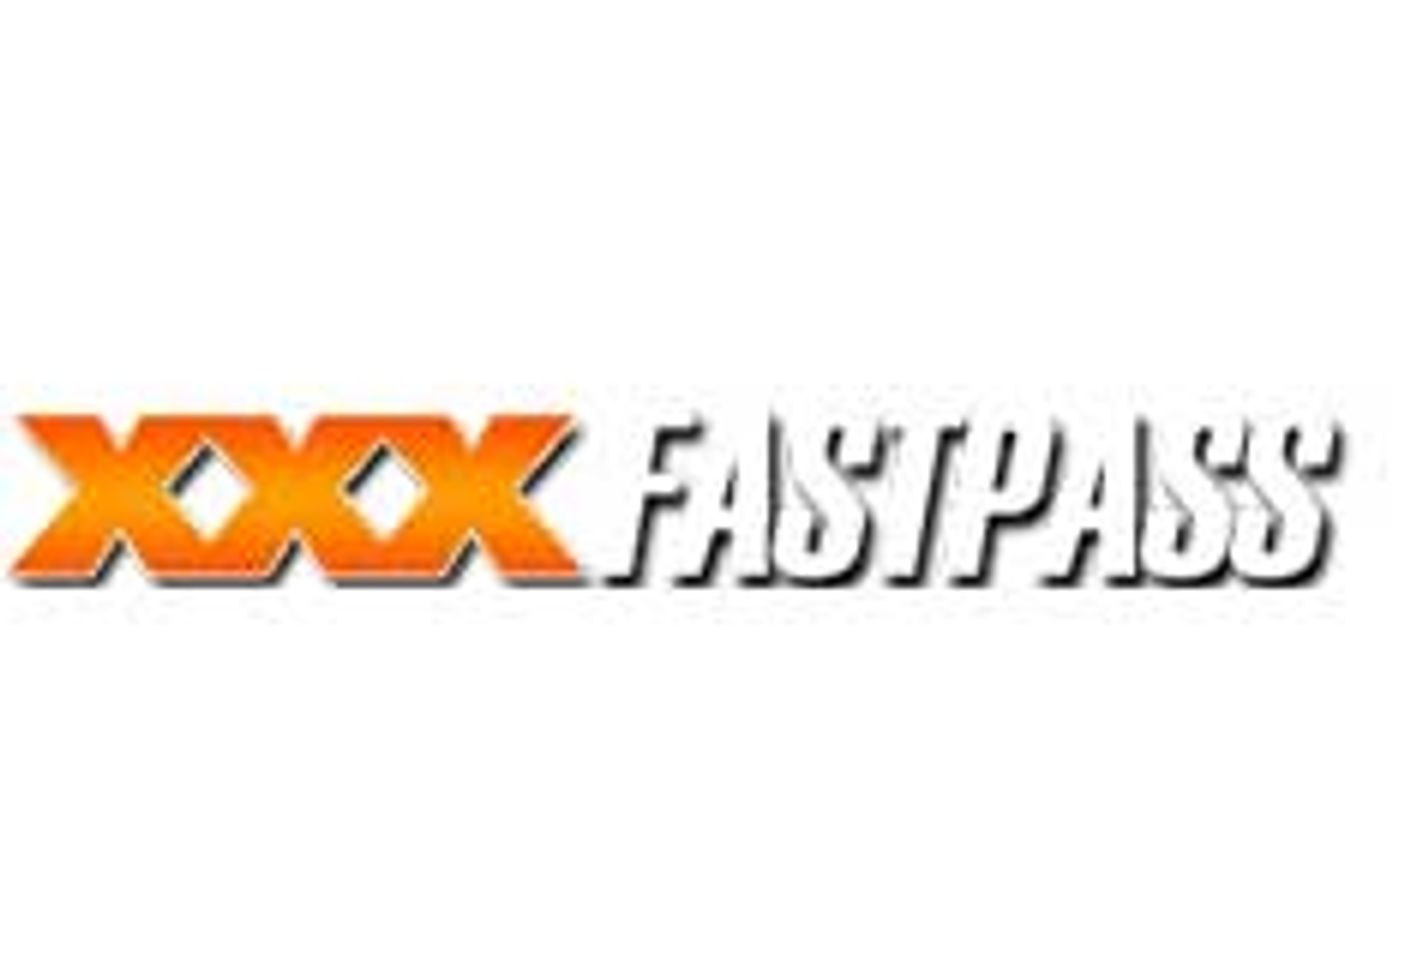 Randi Wright Launches Official Site with xxxFastPass